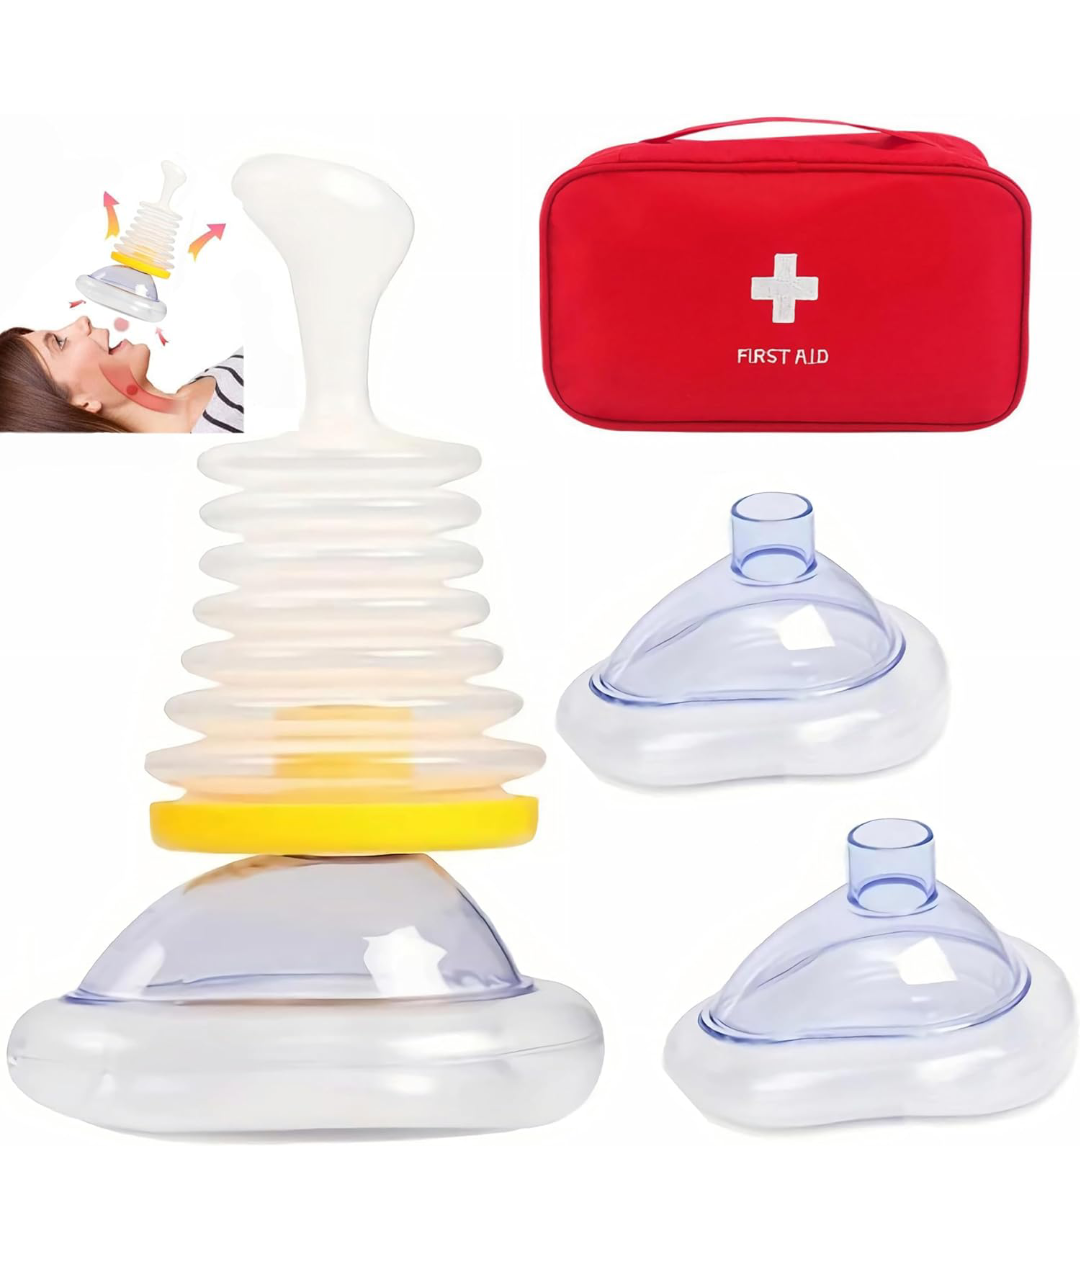 LifeVac CPR Masks & Portable Anti-Chocking Suction Rescue Device